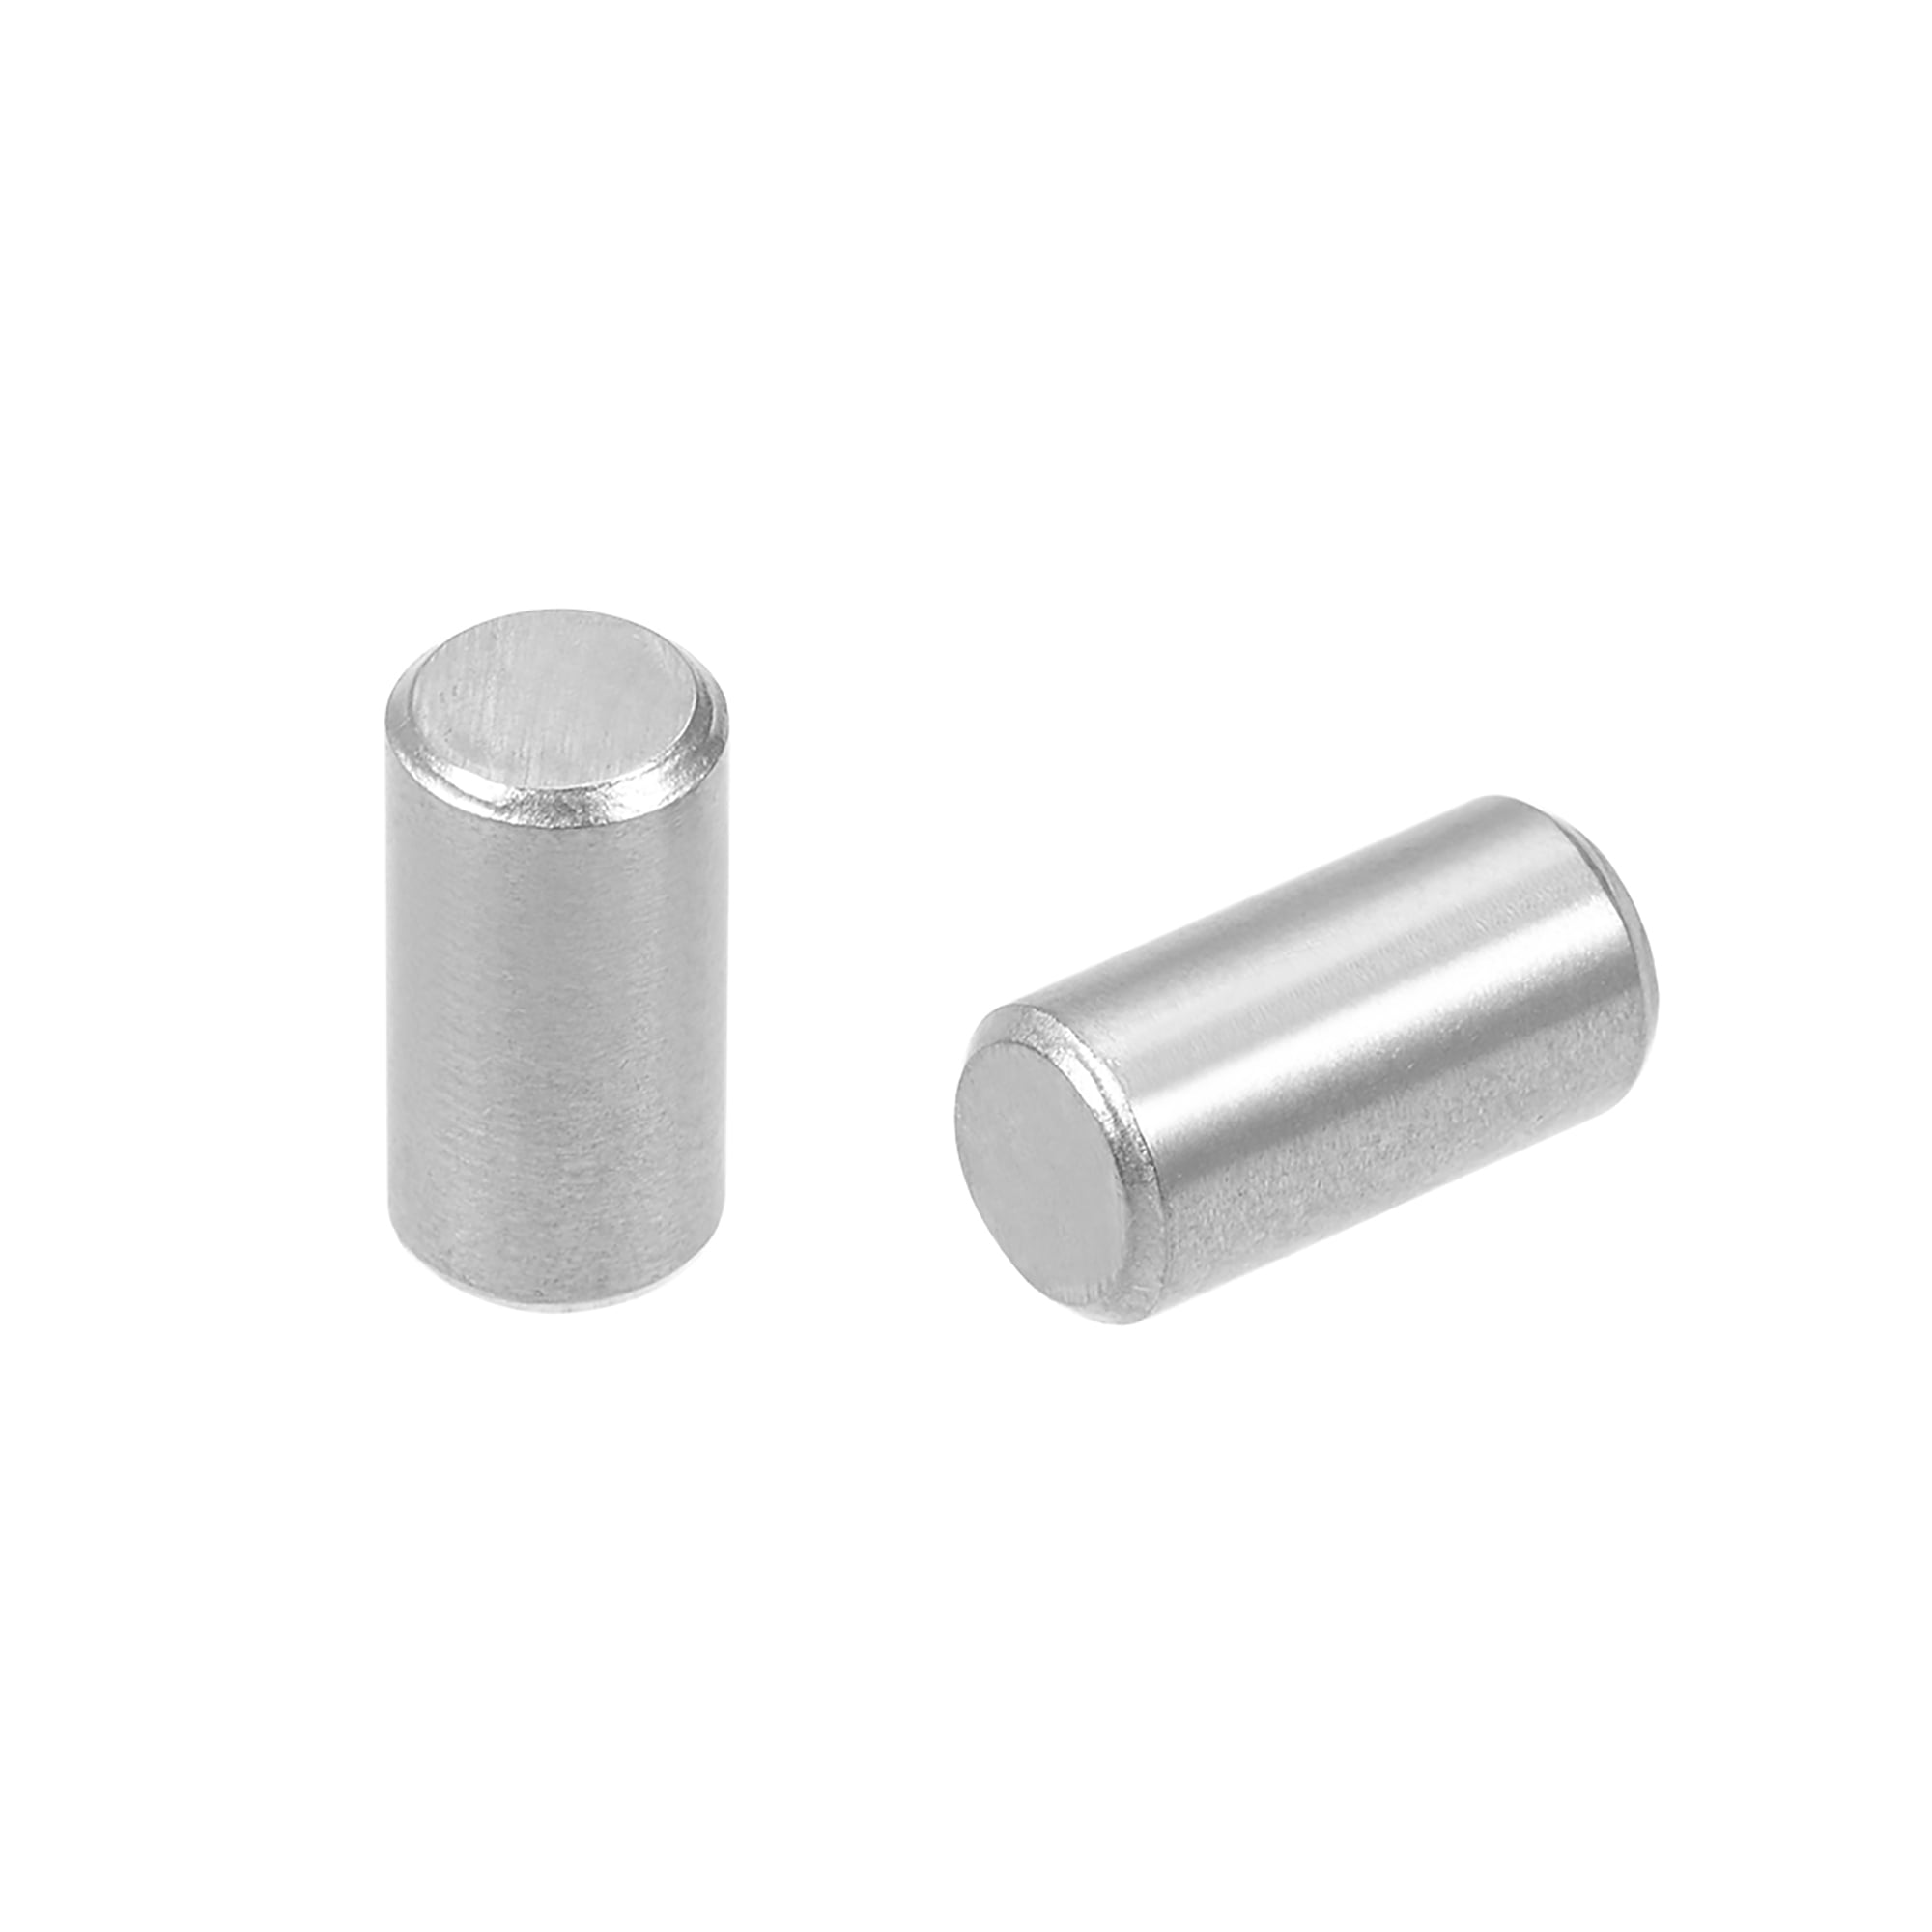 uxcell 10Pcs 10mm X 30mm Dowel Pin 304 Stainless Steel Cylindrical Shelf Support Pin Fasten Elements Silver Tone 